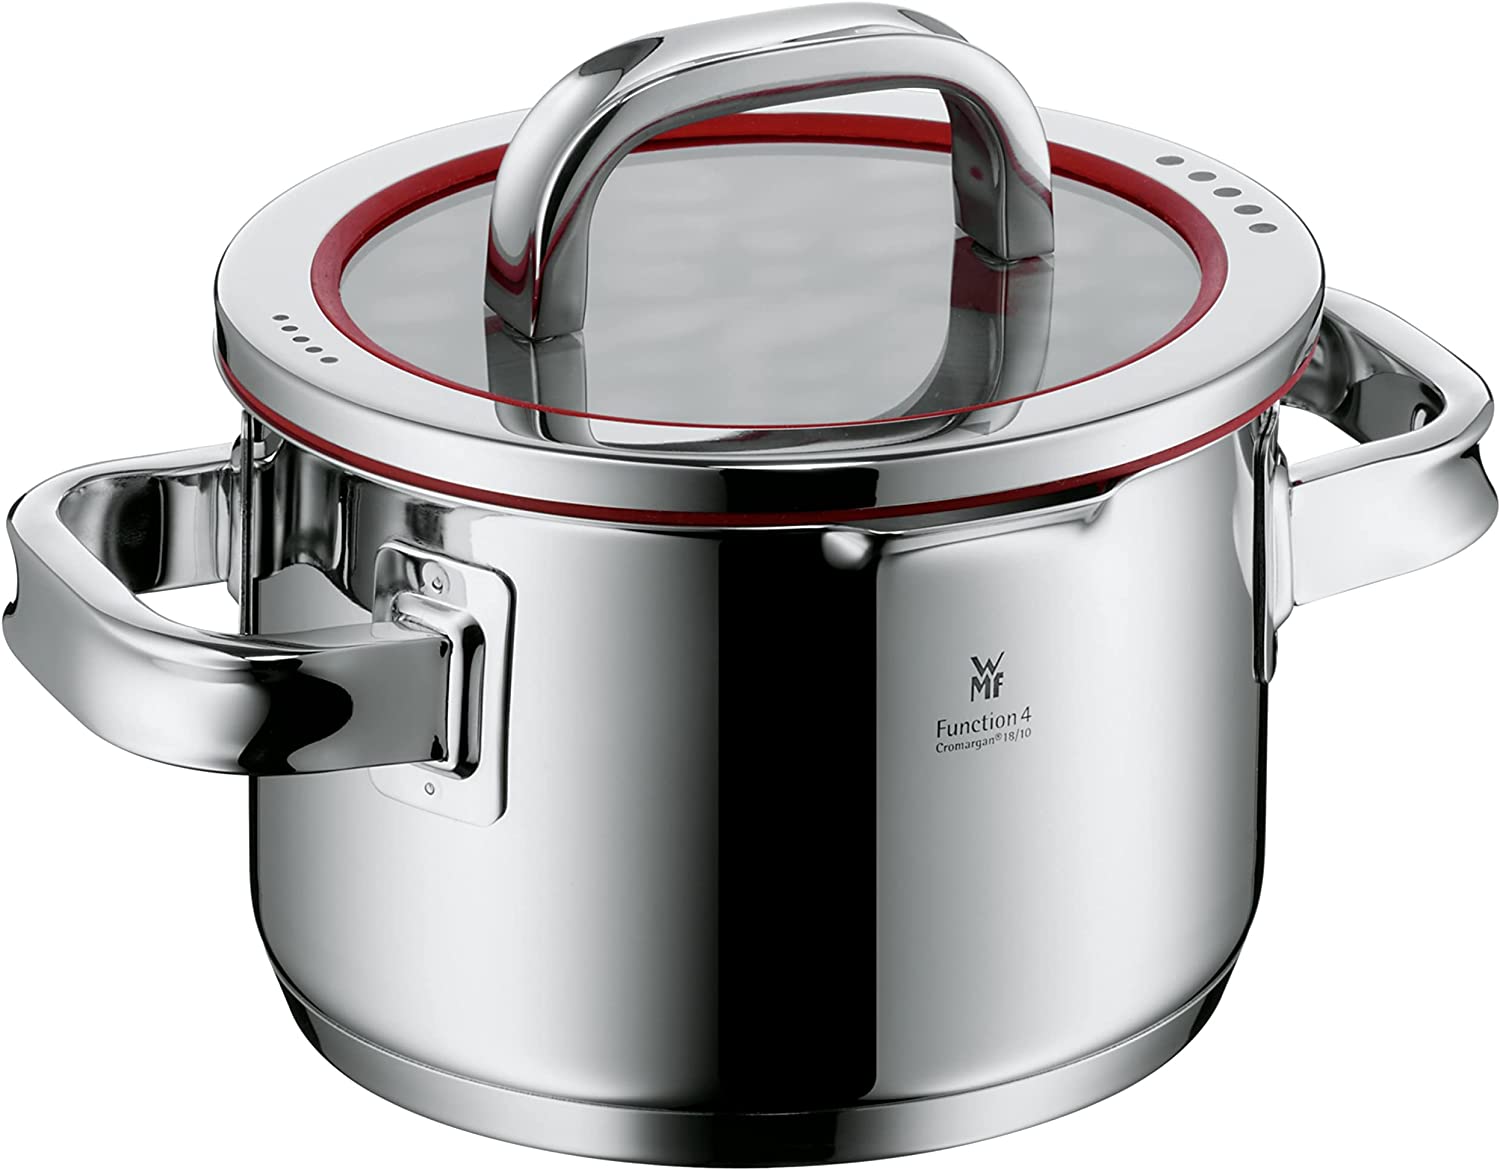 WMF Function 4 high pot 16cm, glass lid, high casserole 1.9l, Cromargan polished stainless steel, 4 pouring functions, inside scale, induction pot, red